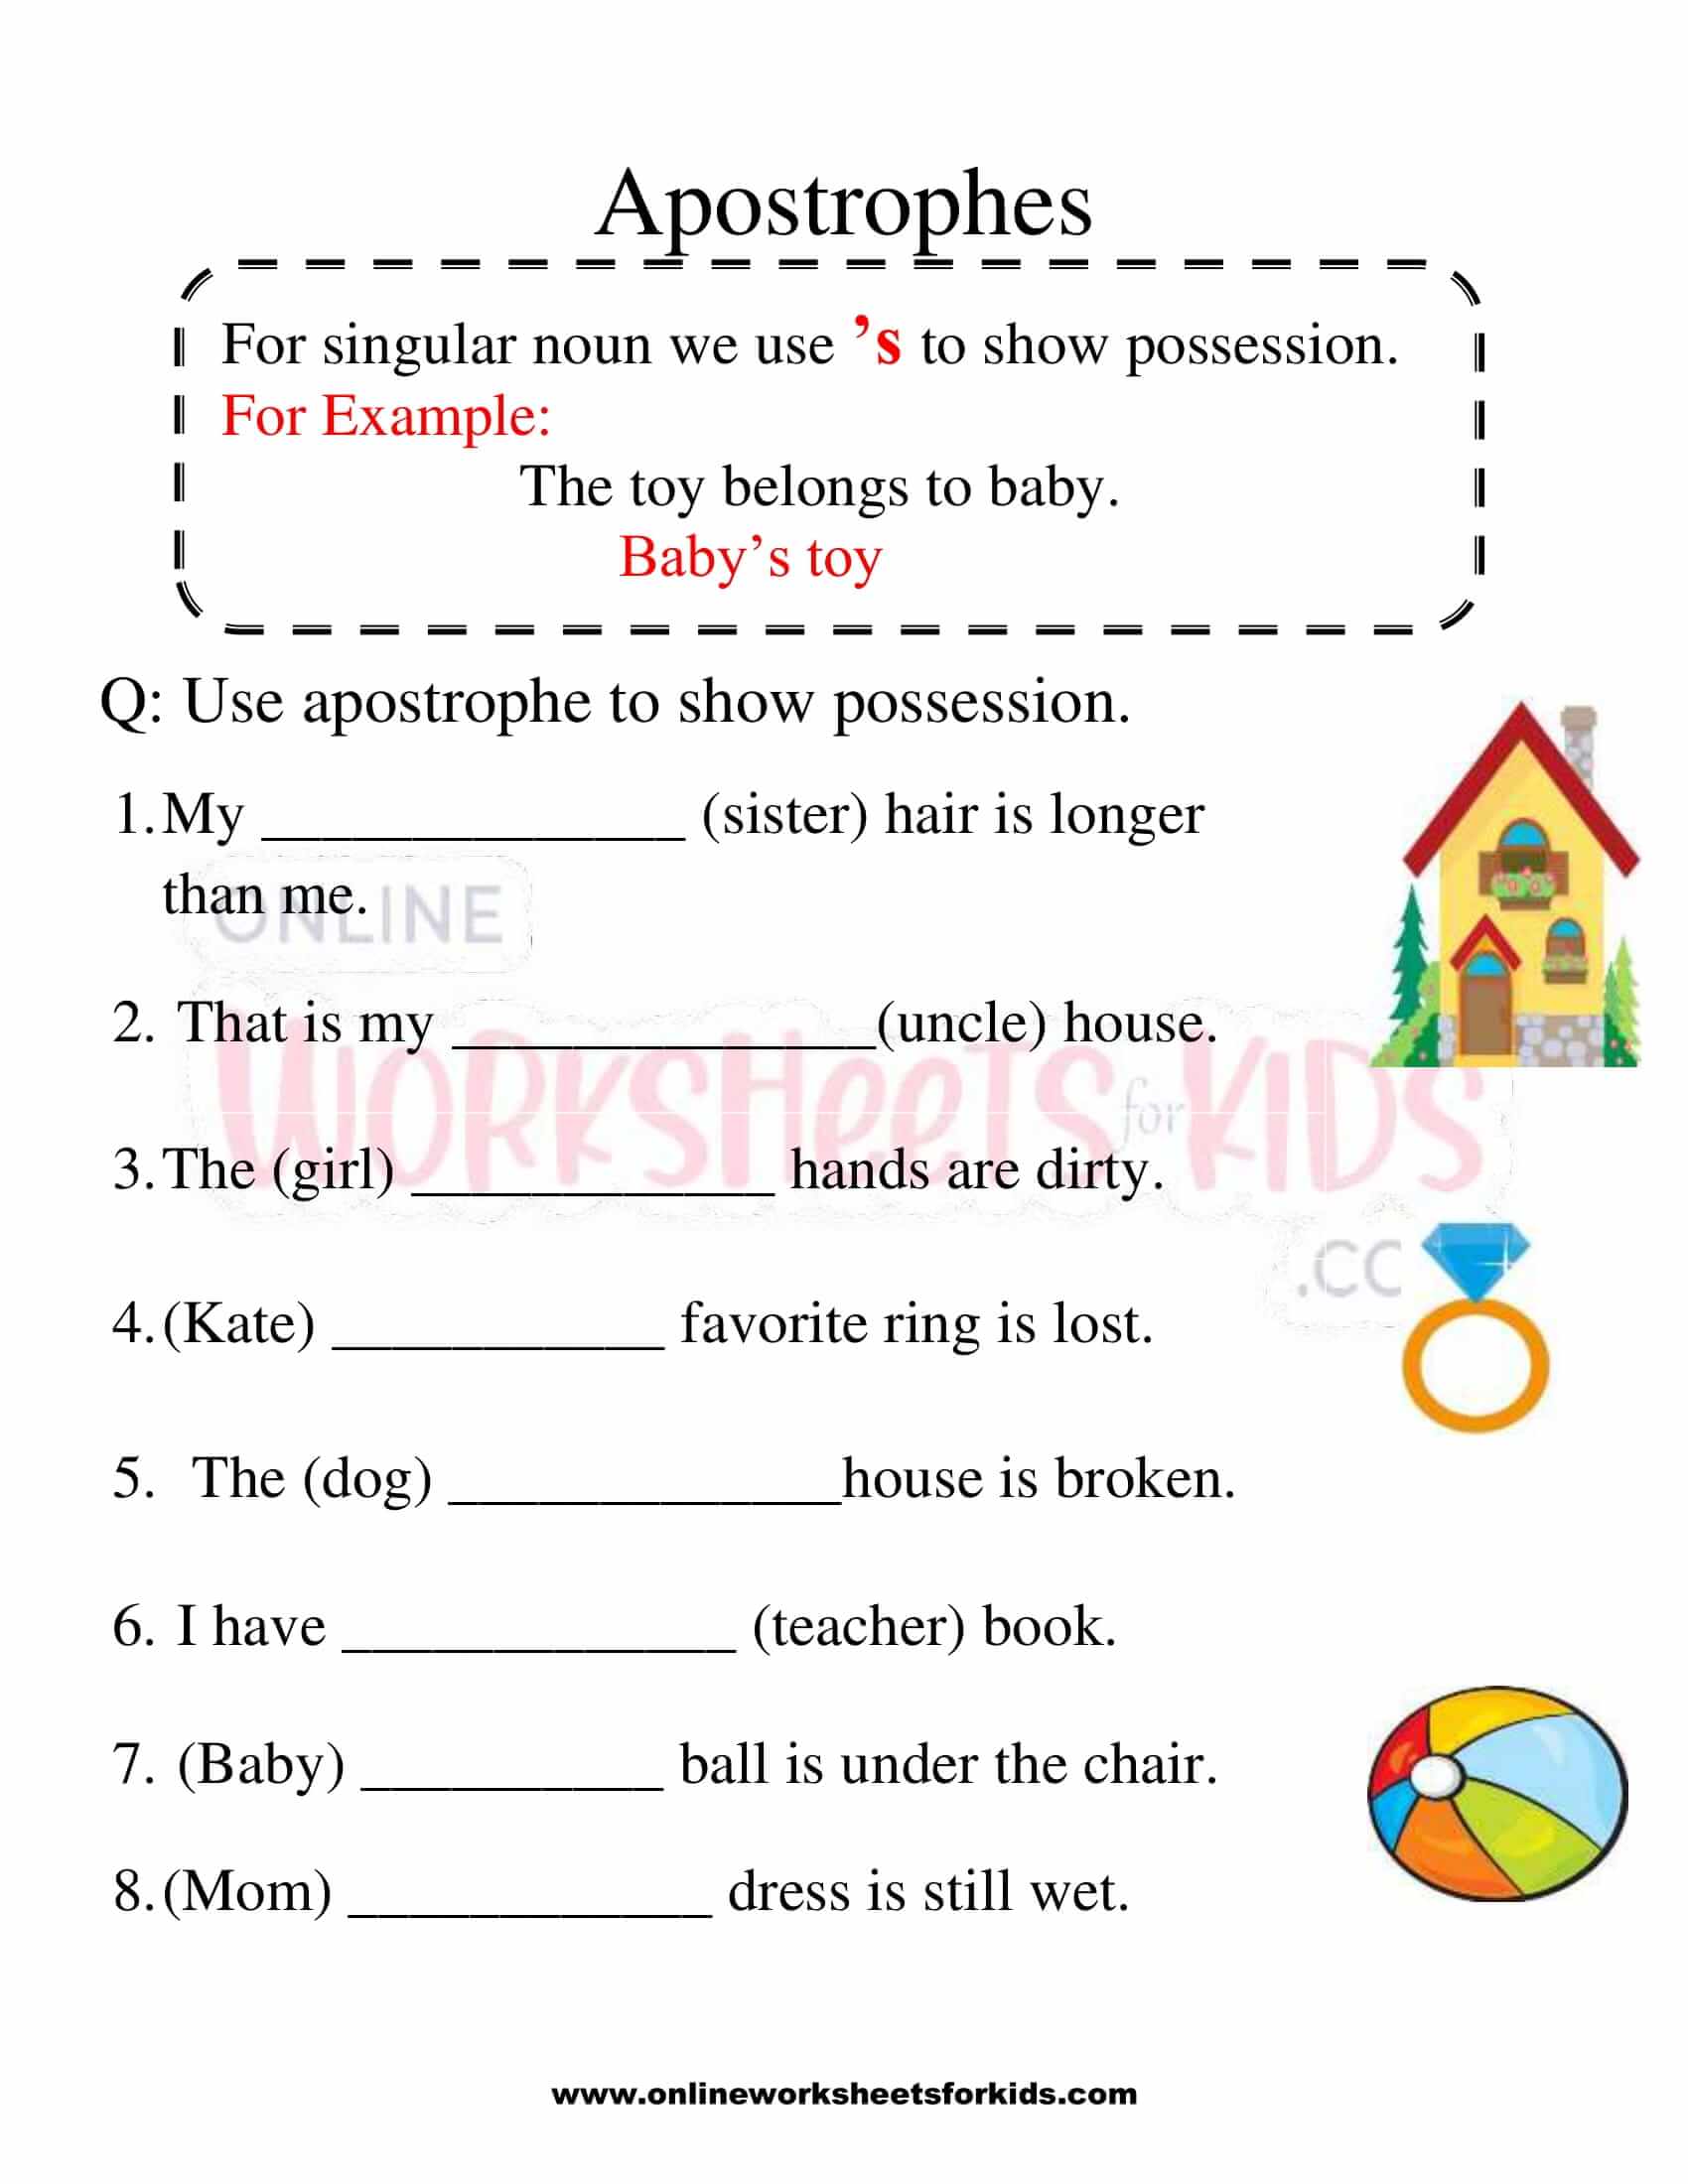 possession-and-apostrophes-worksheets-k5-learning-apostrophe-worksheets-ball-sebastian